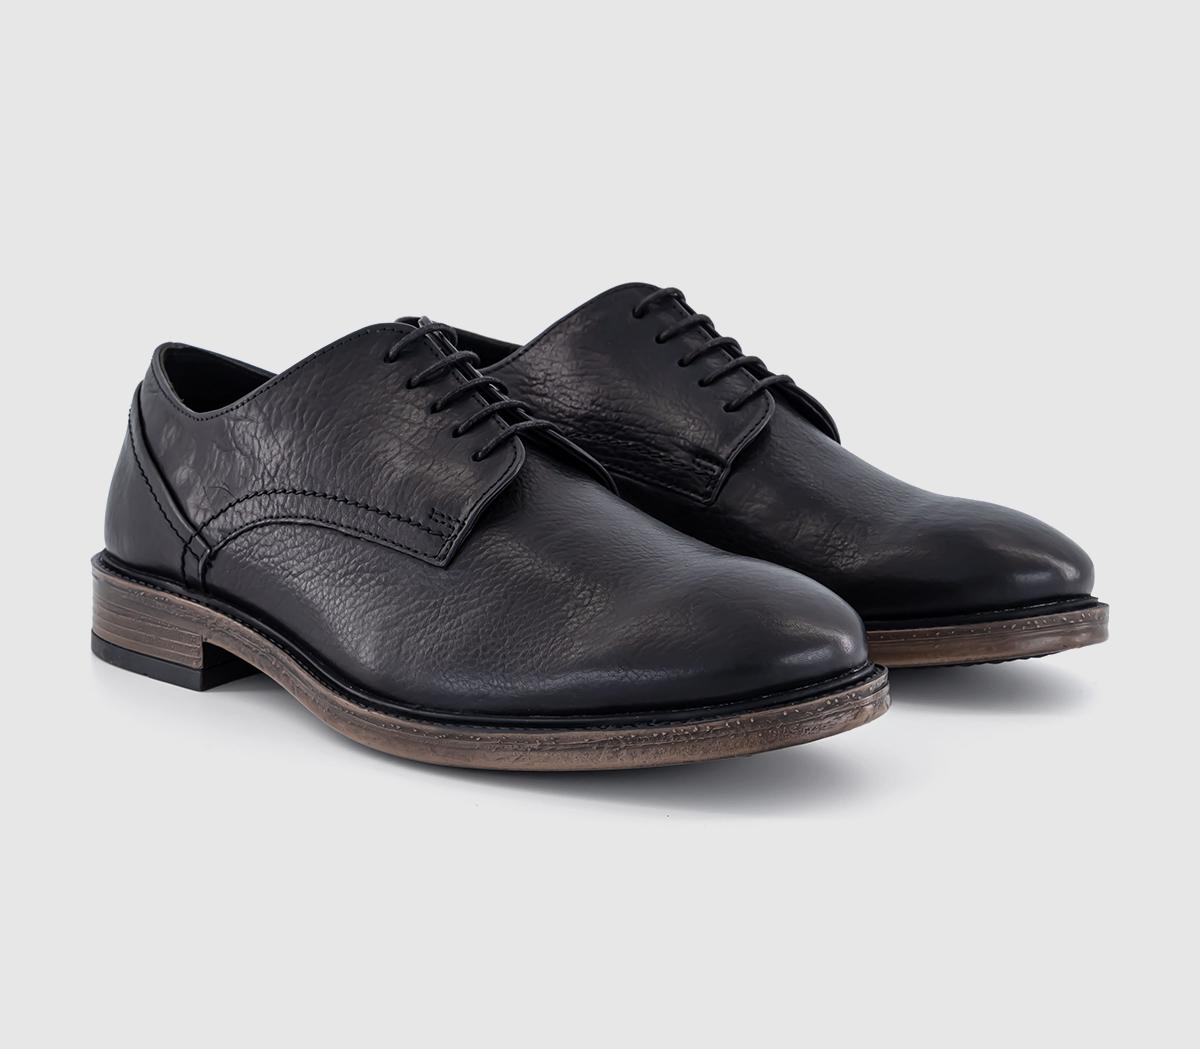 OFFICE Cadeleigh Casual Leather Derby Shoes Black, 11